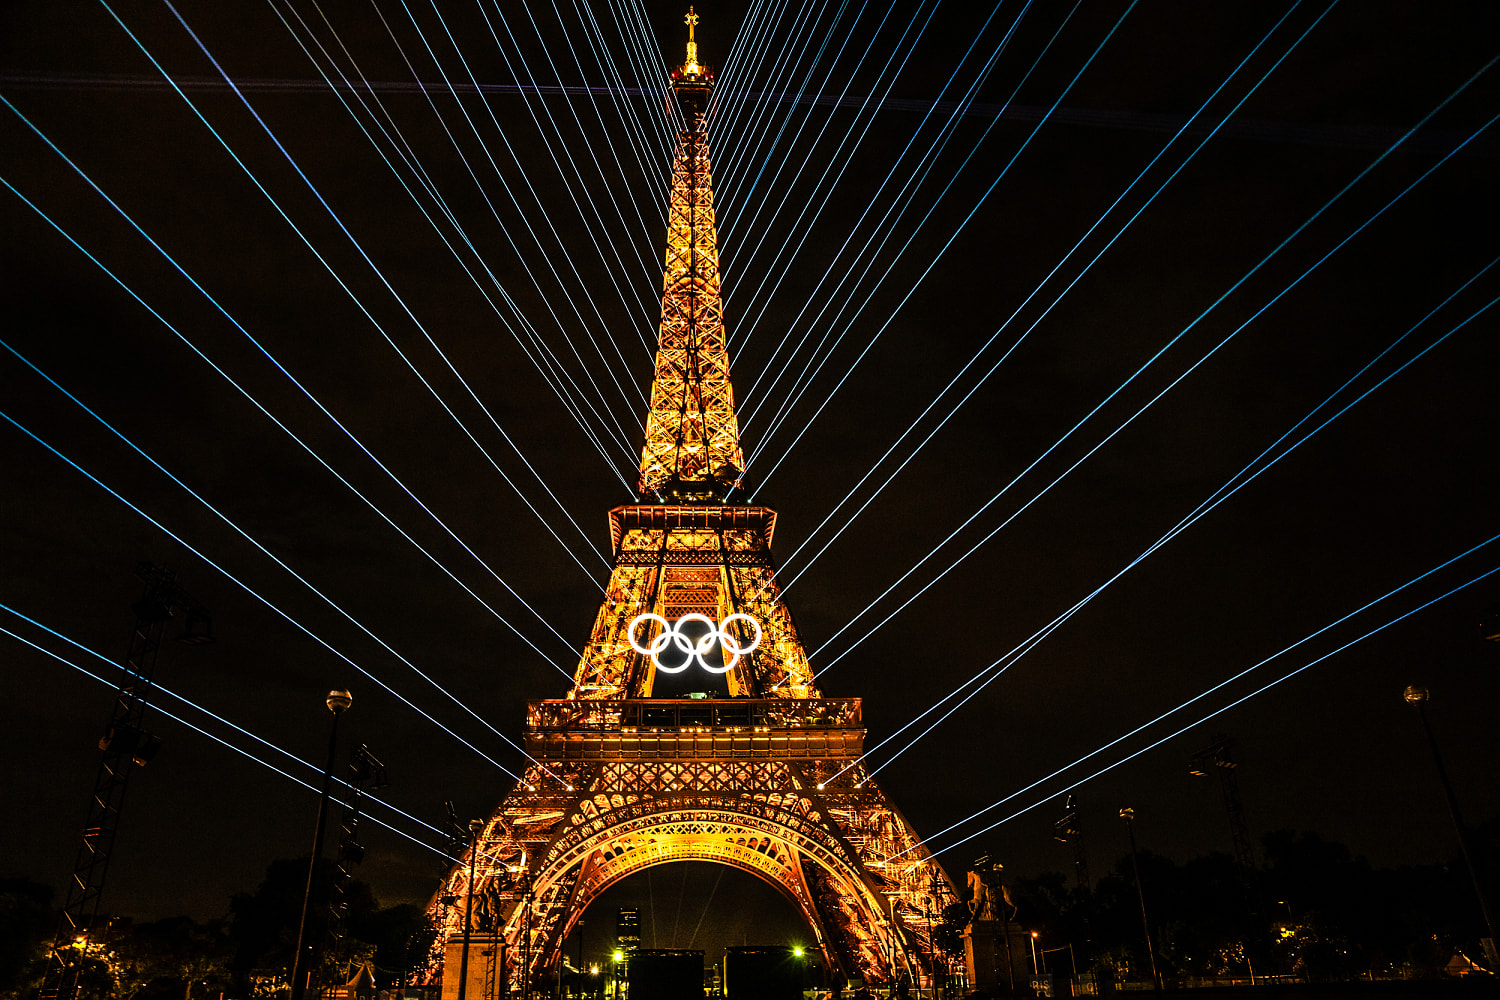 The 2024 Paris Olympic opening ceremony is the most ambitious yet